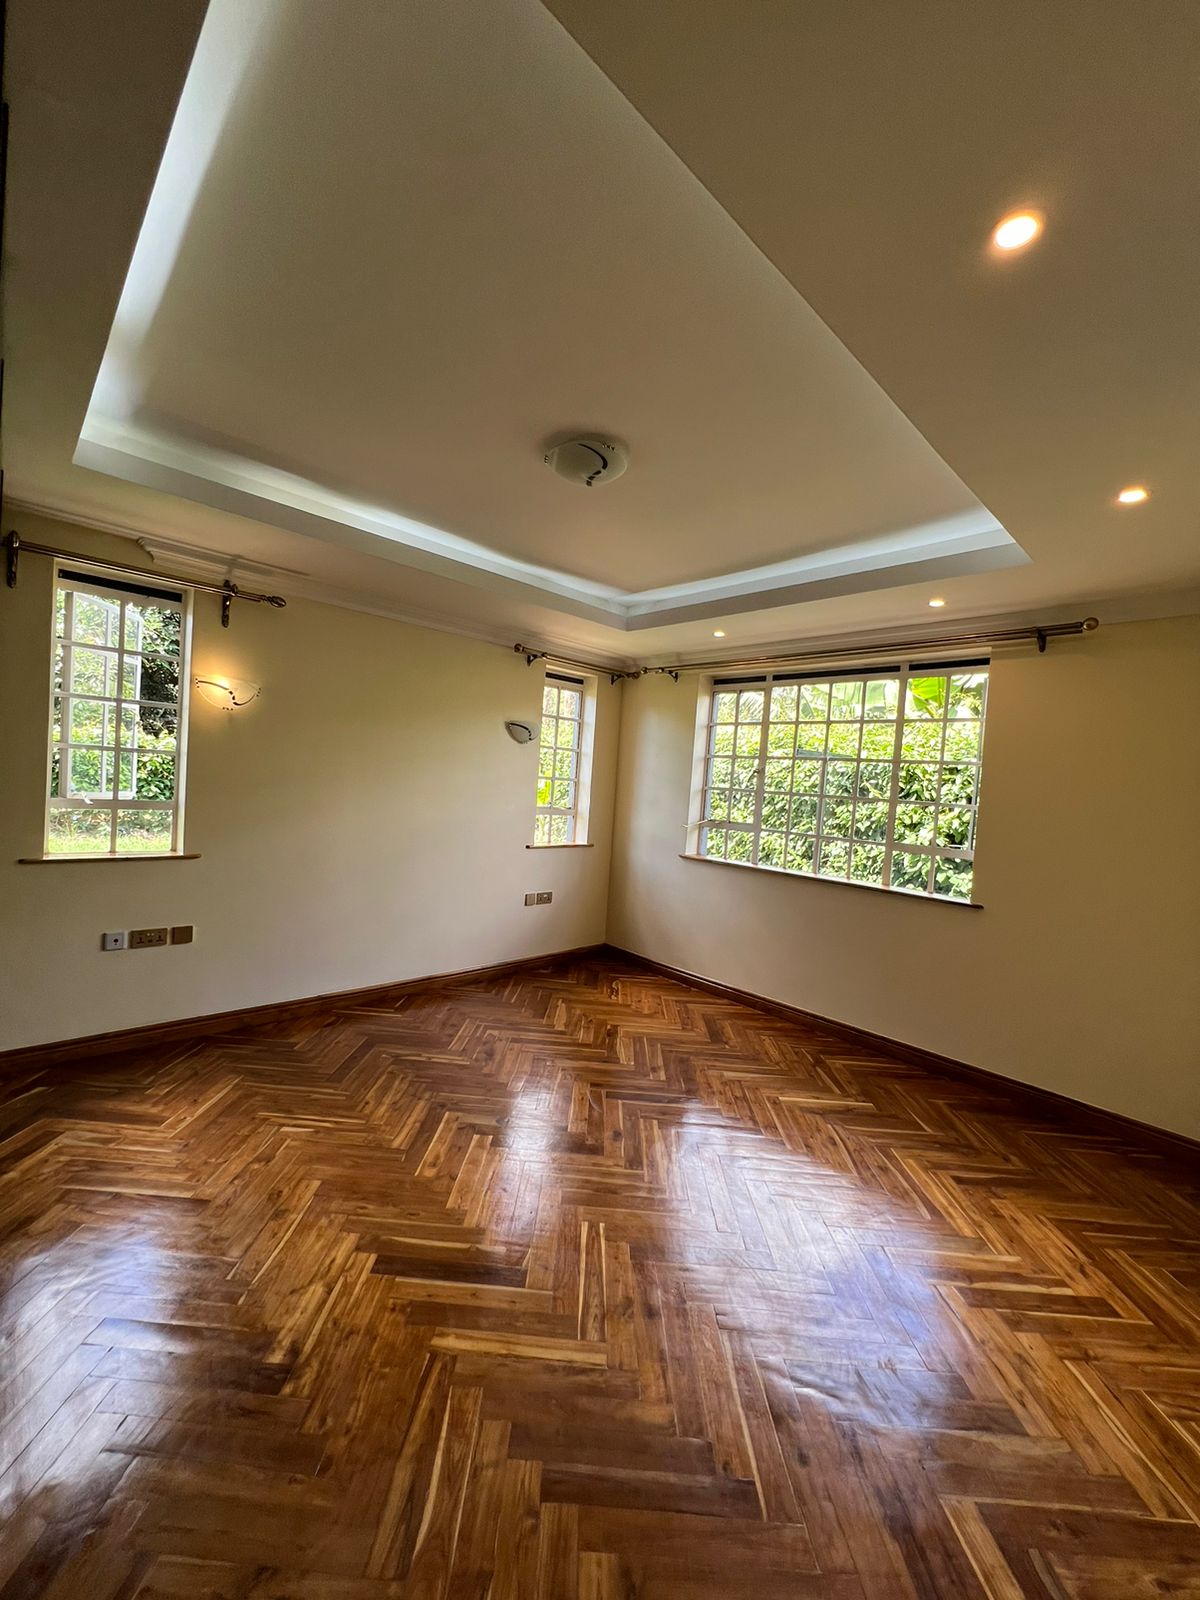 4 bedroom plus dsq townhouse to let in the leafy suburb of Karen. Sitting on 1/2acre land. Rent per month 300,000. Listed by Musilli Homes.